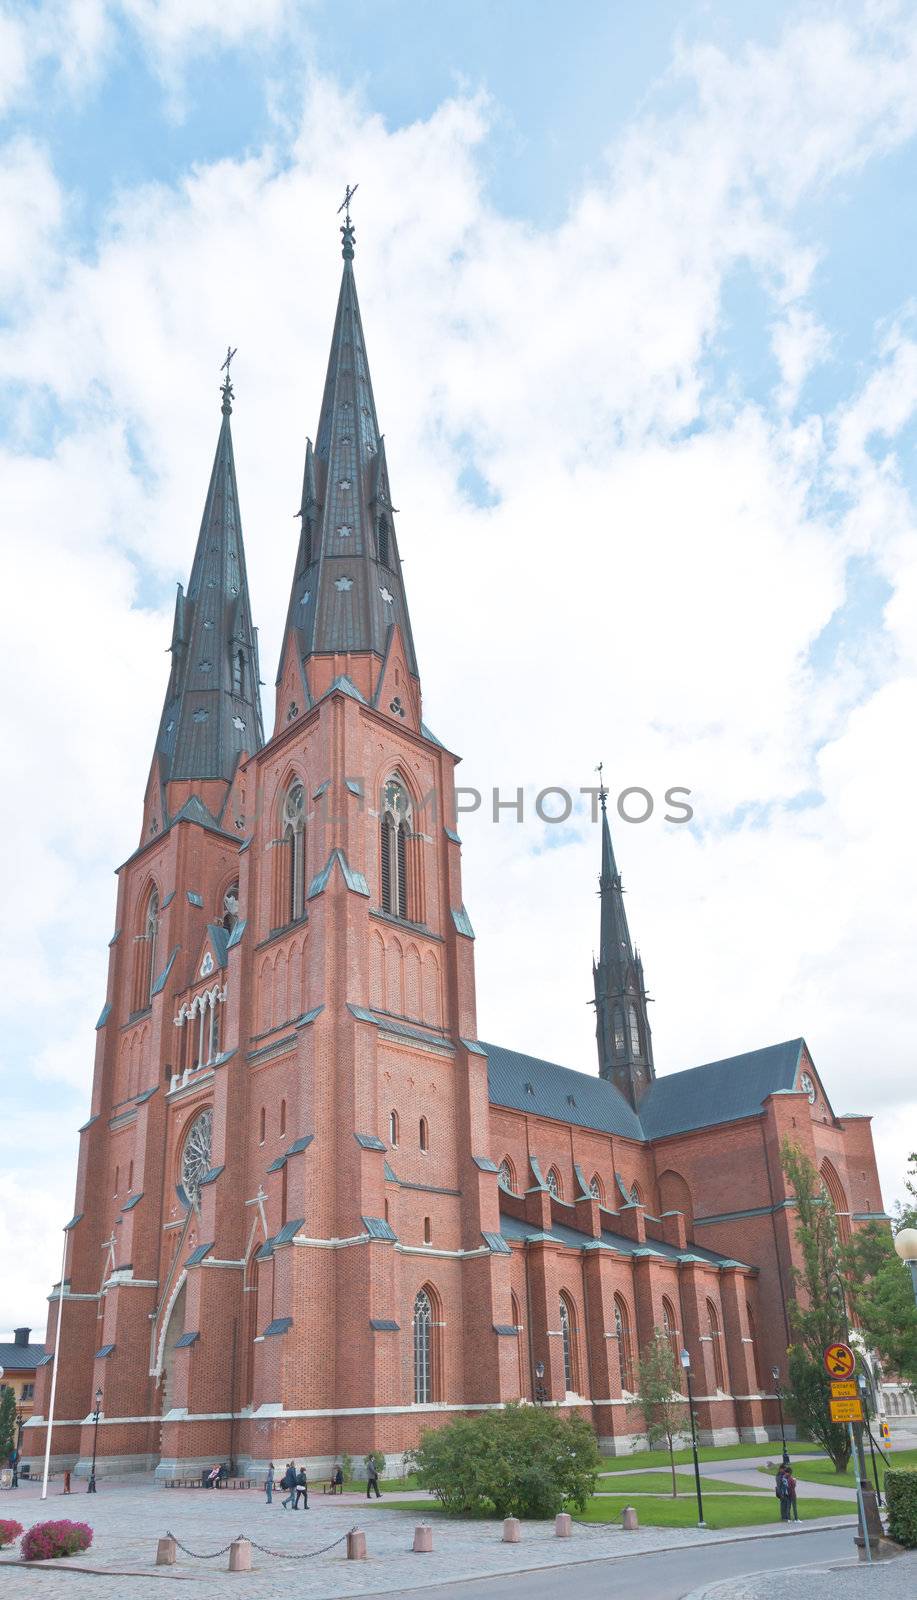 The famous Uppsala cathedral in Sweden - the largest church in Scandinavia 
